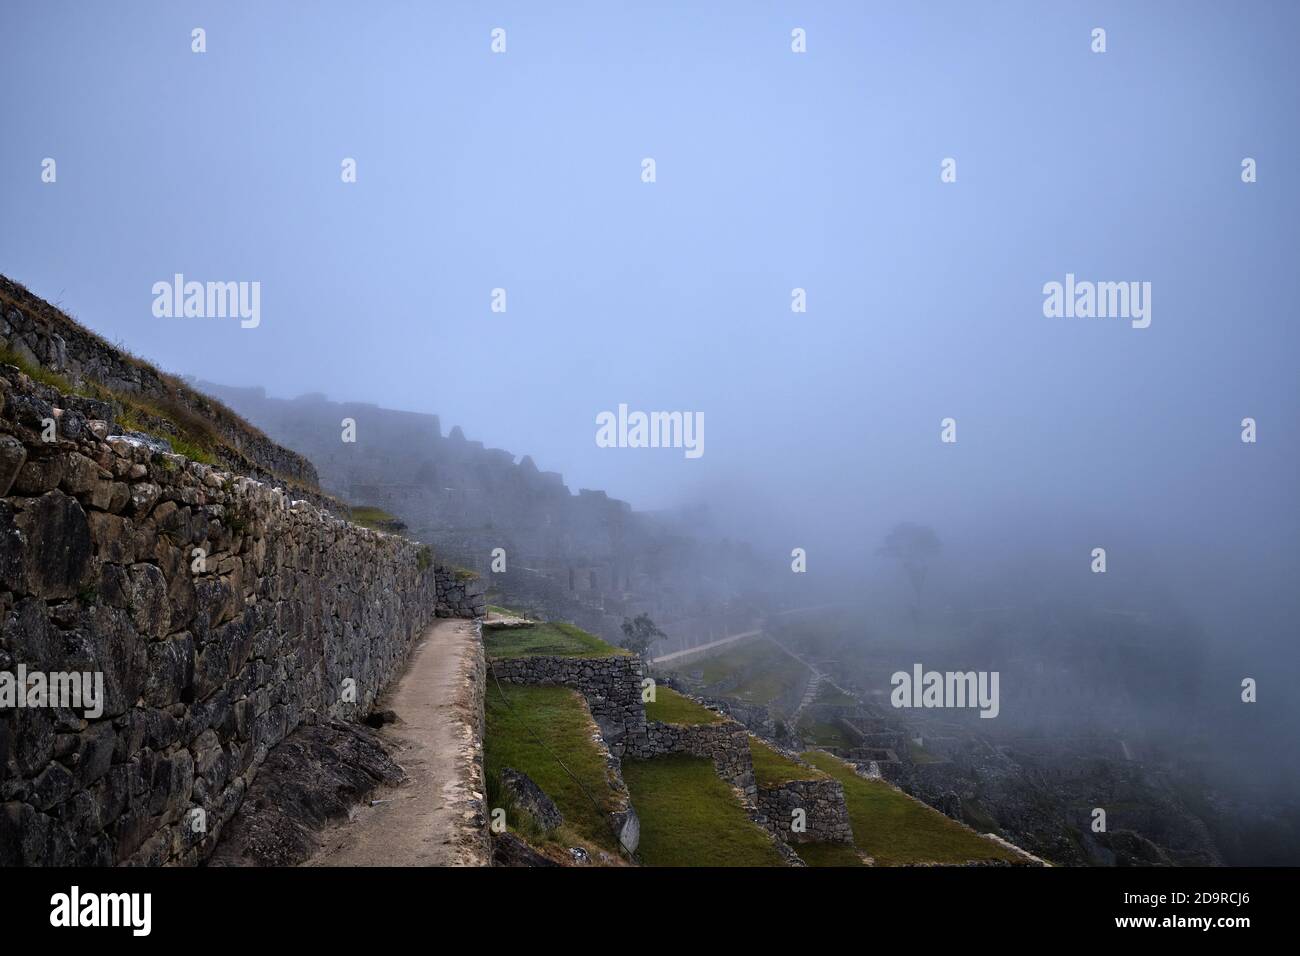 Mist and low cloud roll in over the terraces before sunrise dawn at the ruins of Machu Picchu, Peru Stock Photo